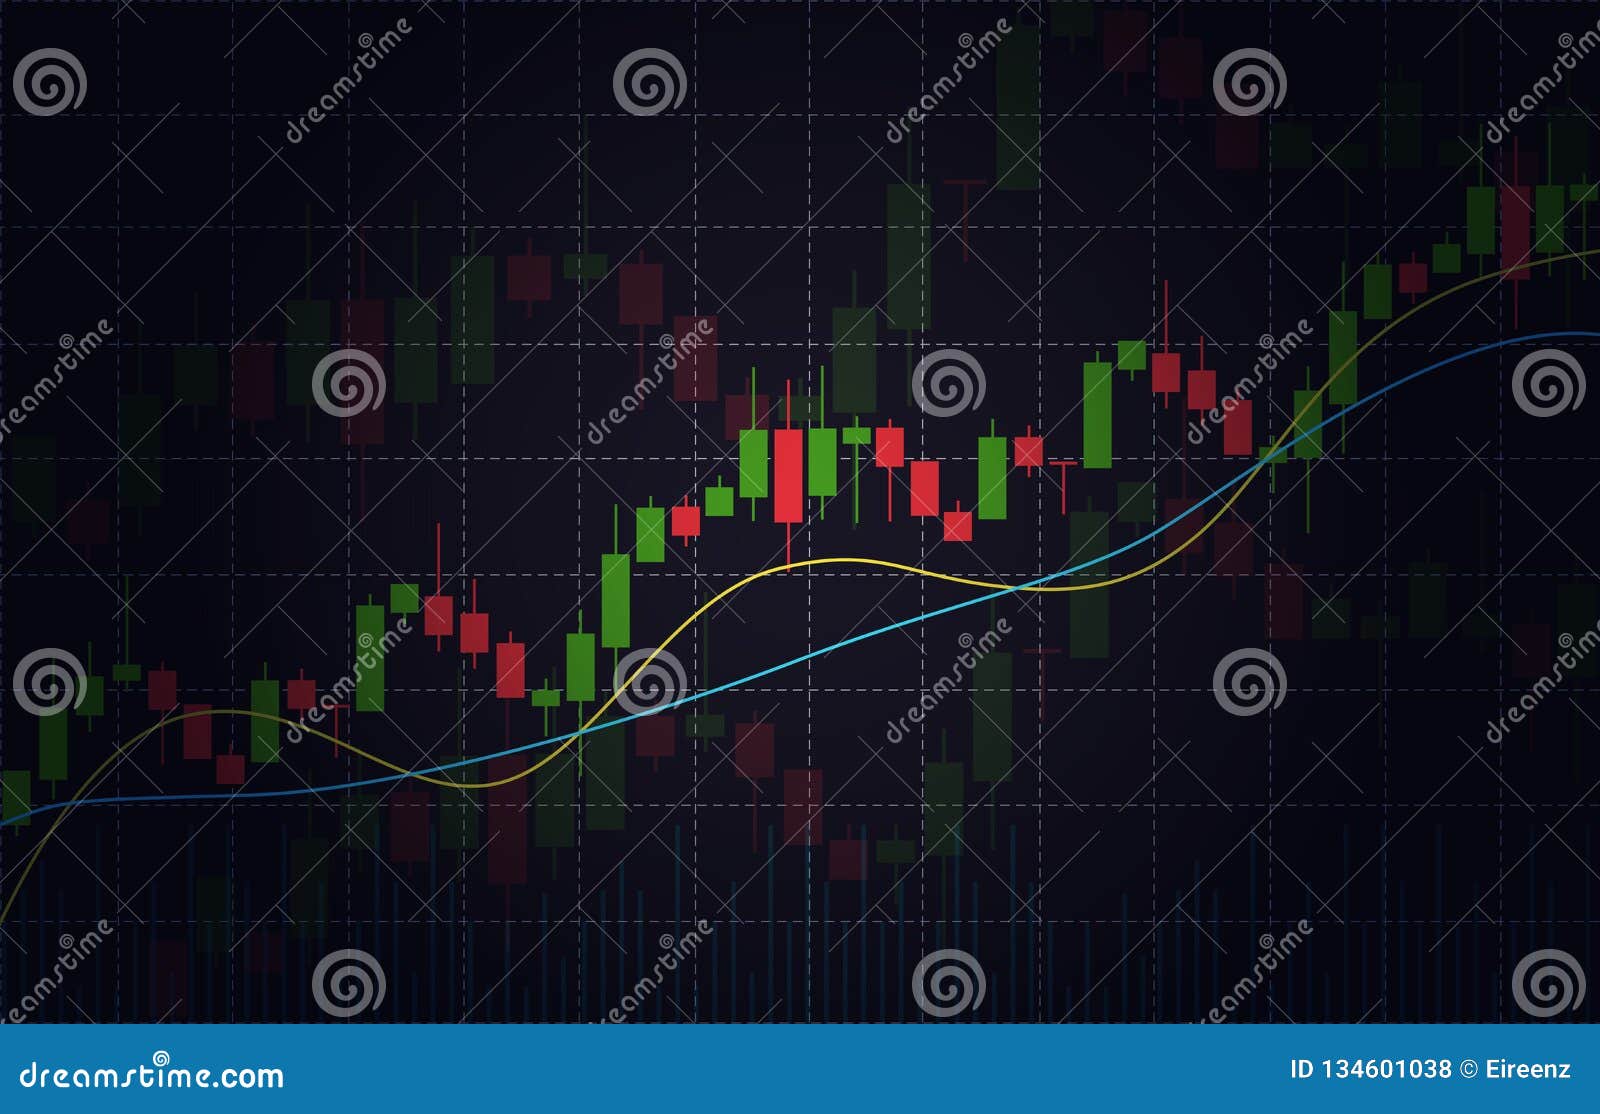 Vector Background With Stock Market Candlesticks Chart Forex - 